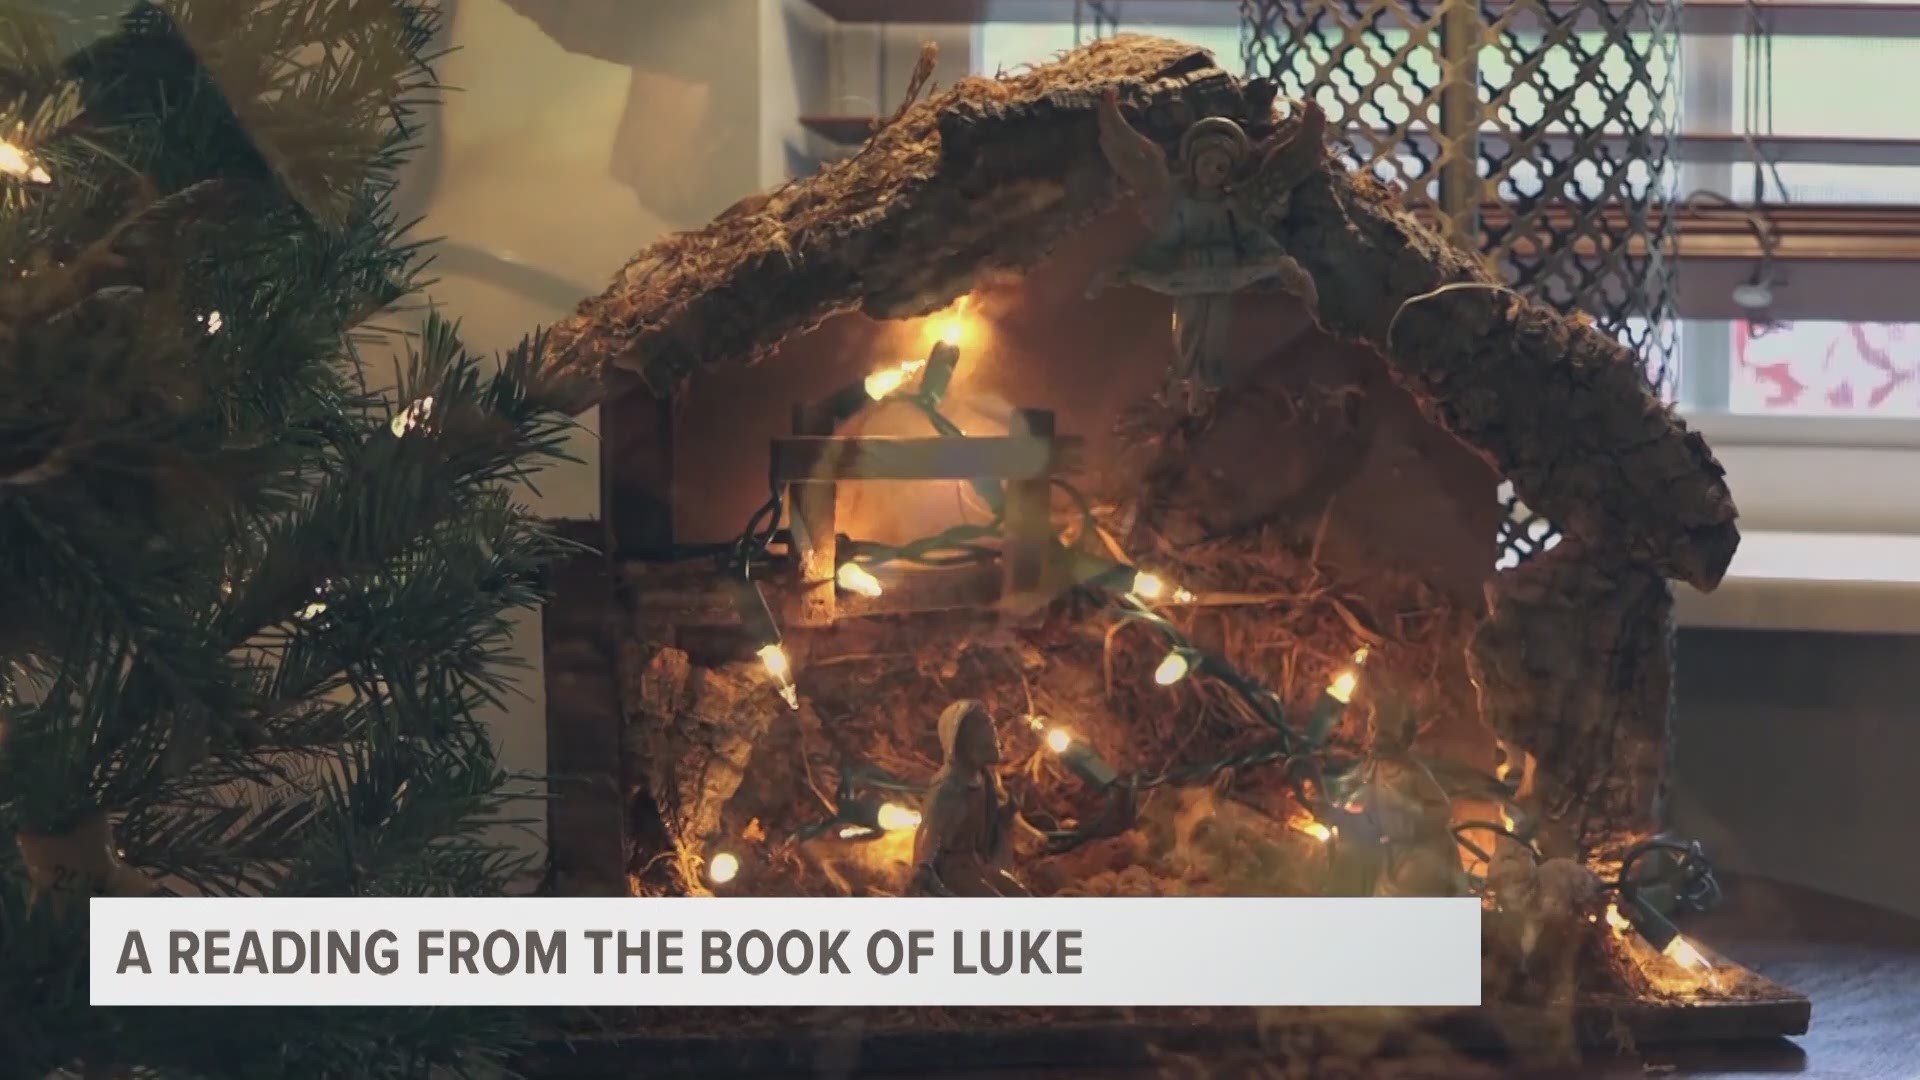 Christian religious leaders gathered on Live at Five at Four, and recounted the Christmas story as depicted in the Book of Luke to children.